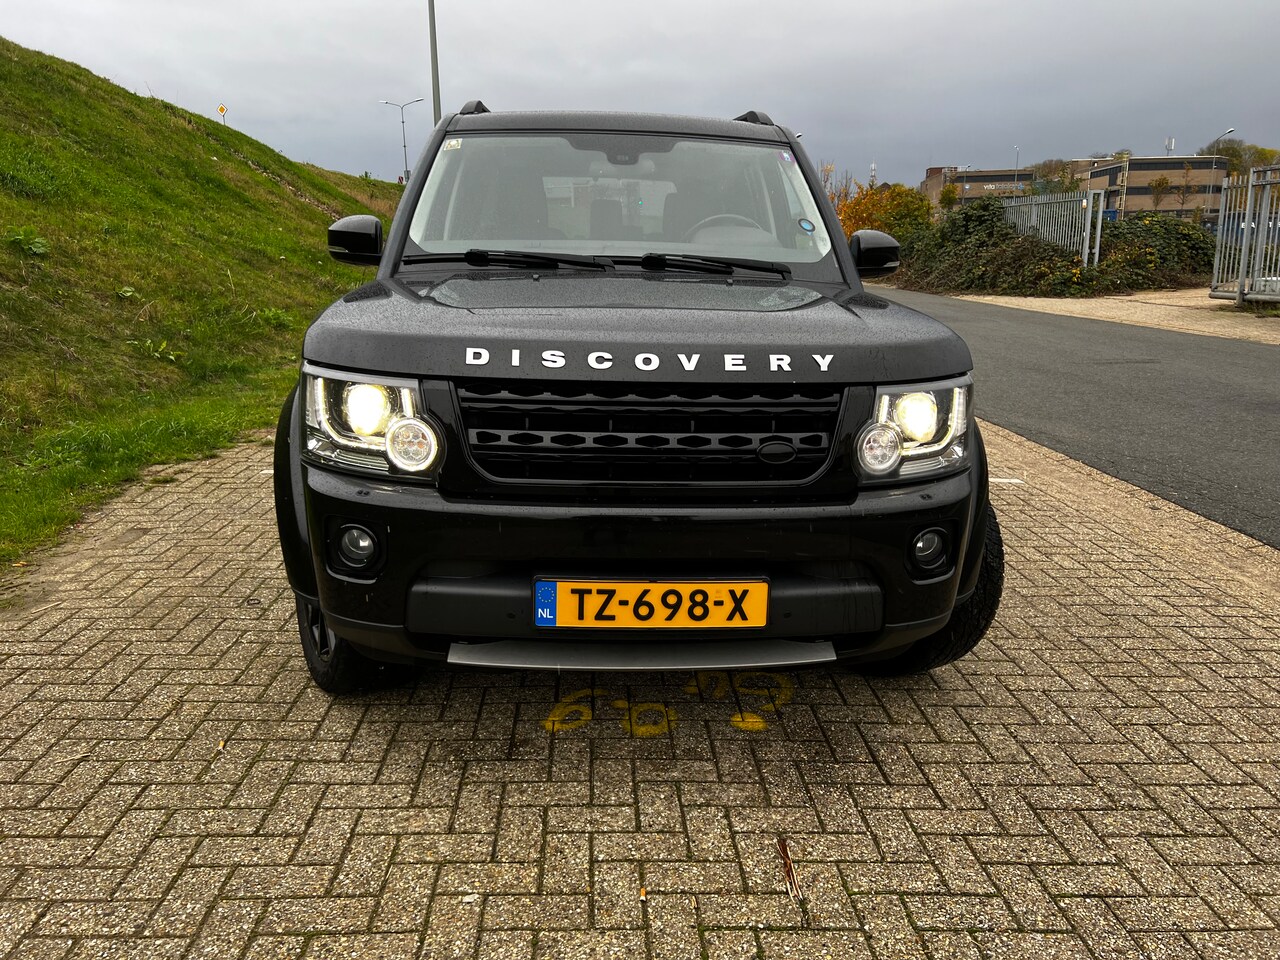 Land Rover Discovery - 3.0 SDV6 XXV Special Edition 256pk - HSE Luxury - 7-persoons - Pano dak - Trekhaak - "BLACK" - AutoWereld.nl